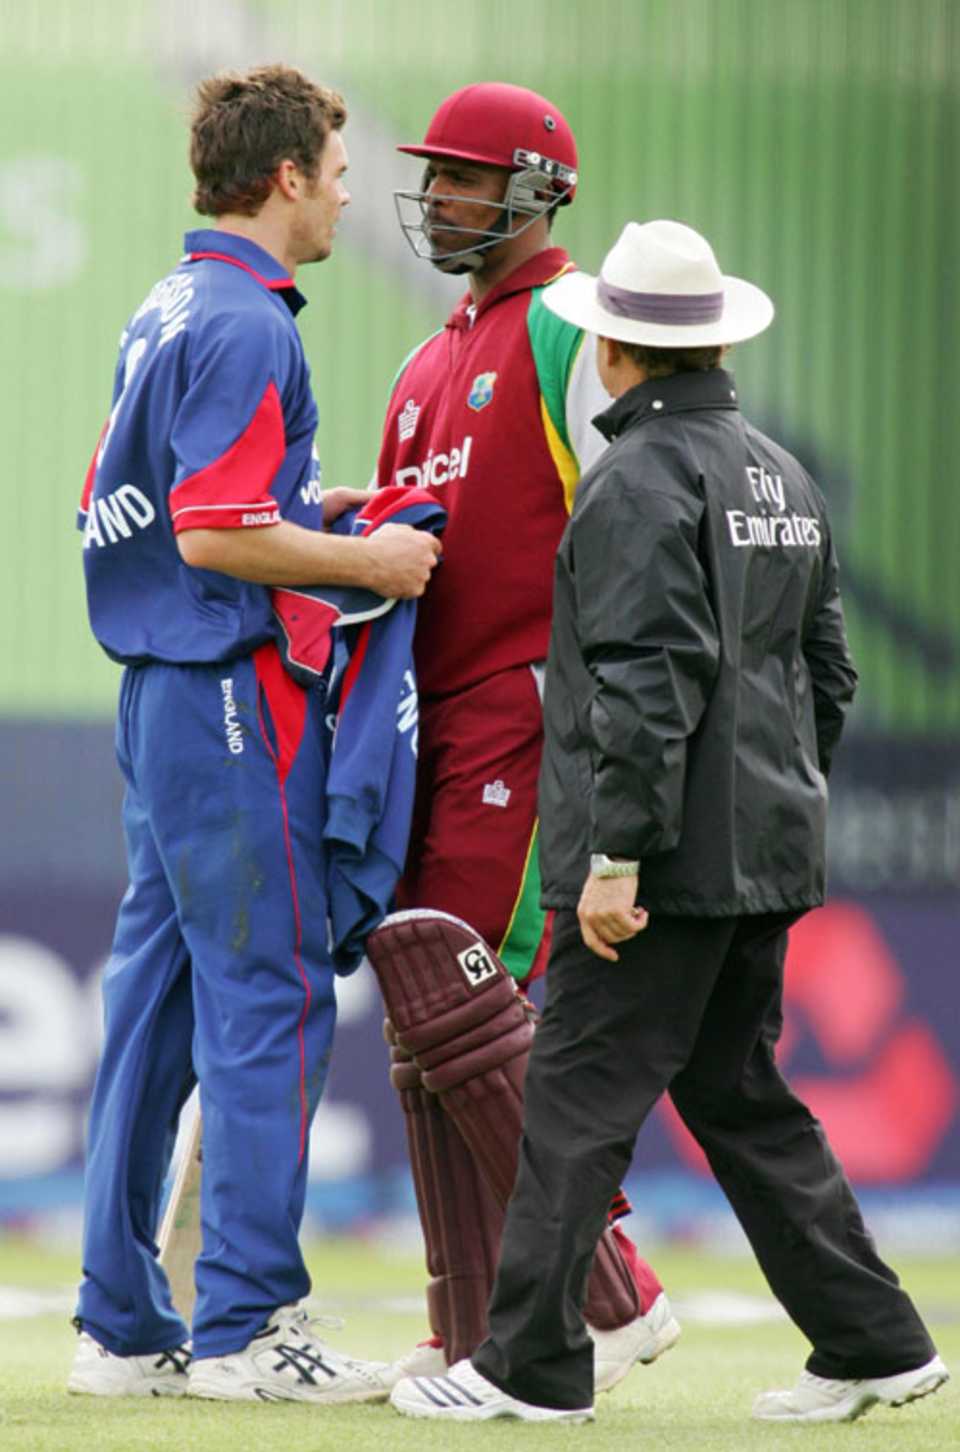 James Anderson and Runako Morton go toe to toe - Anderson was subsequently fined 50% of his match fee after being found guilty of barging into Morton, England v West Indies, 2nd ODI, Edgbaston, July 4, 2007